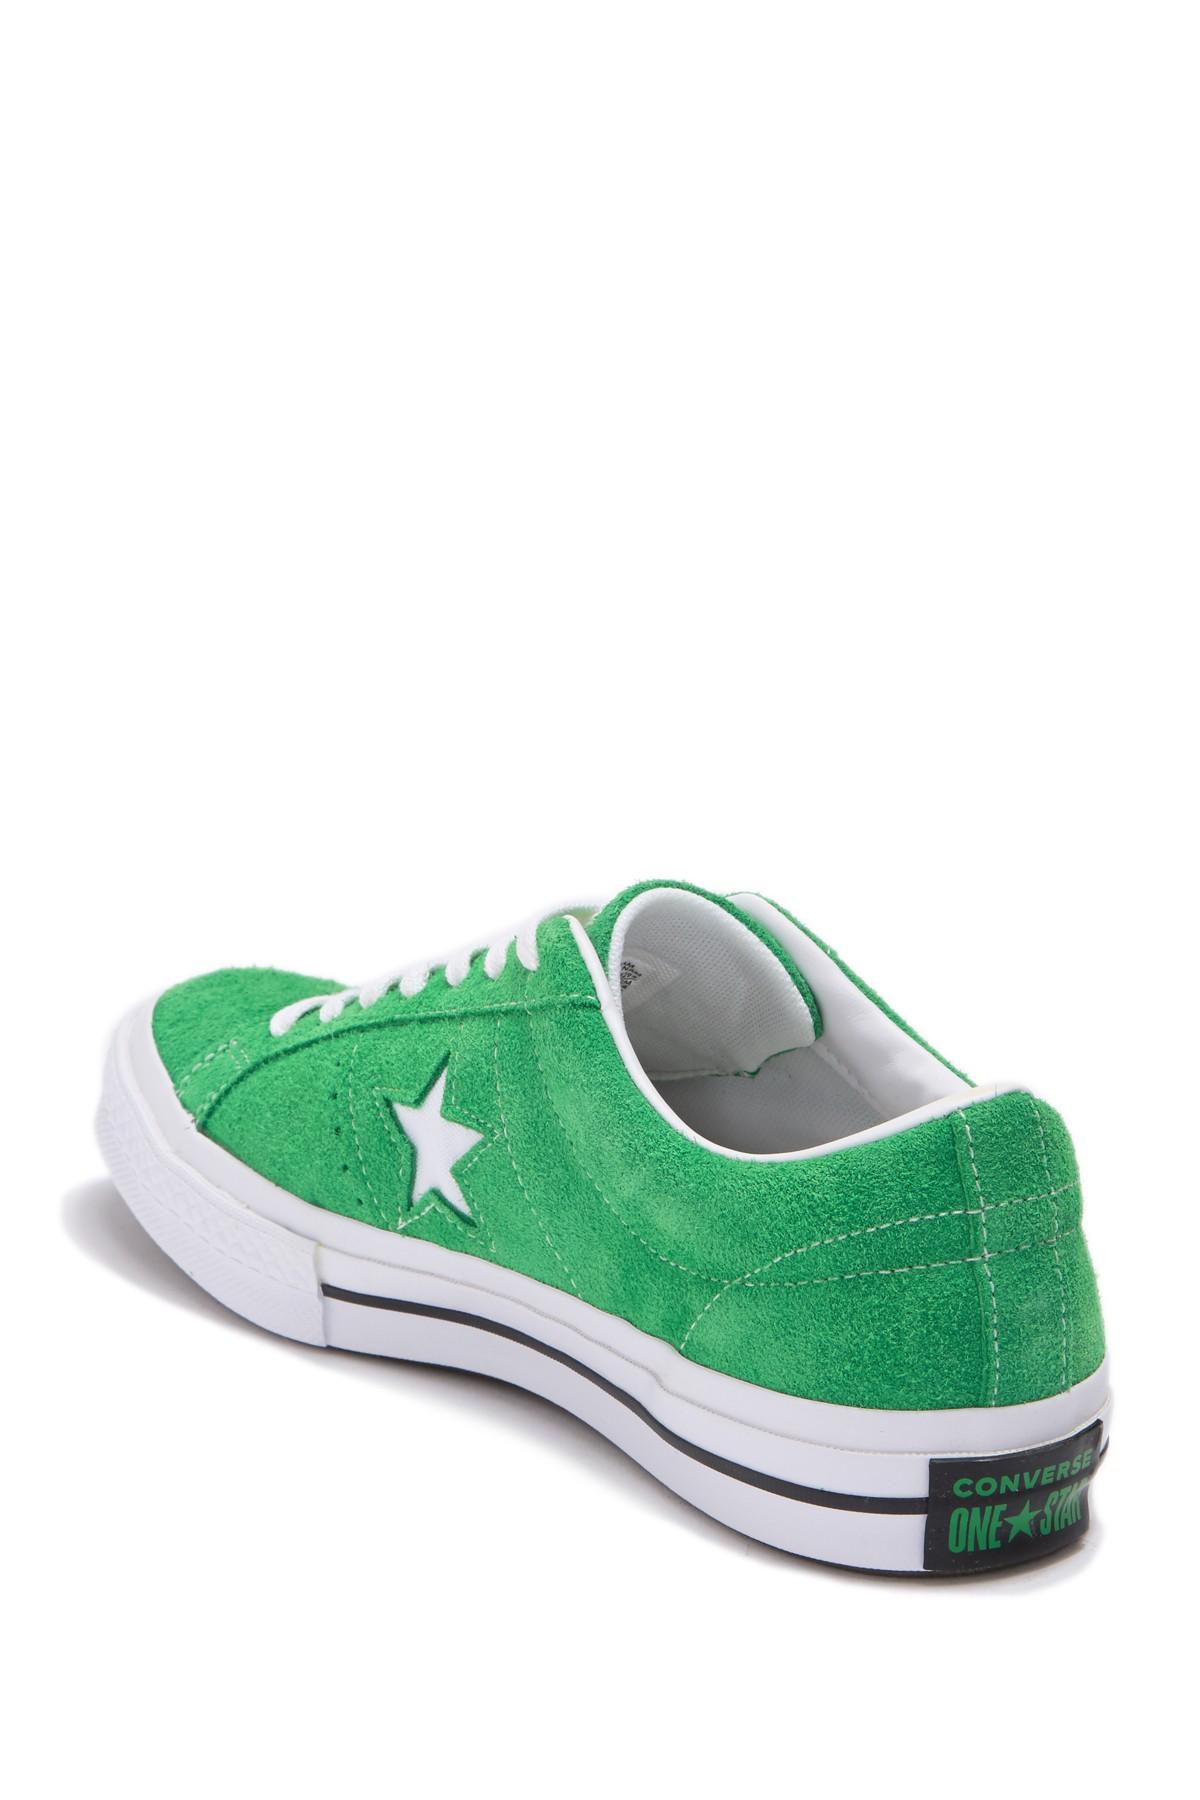 Converse One Star Oxford Suede Green Star Sneaker (unisex) for Men - Lyst